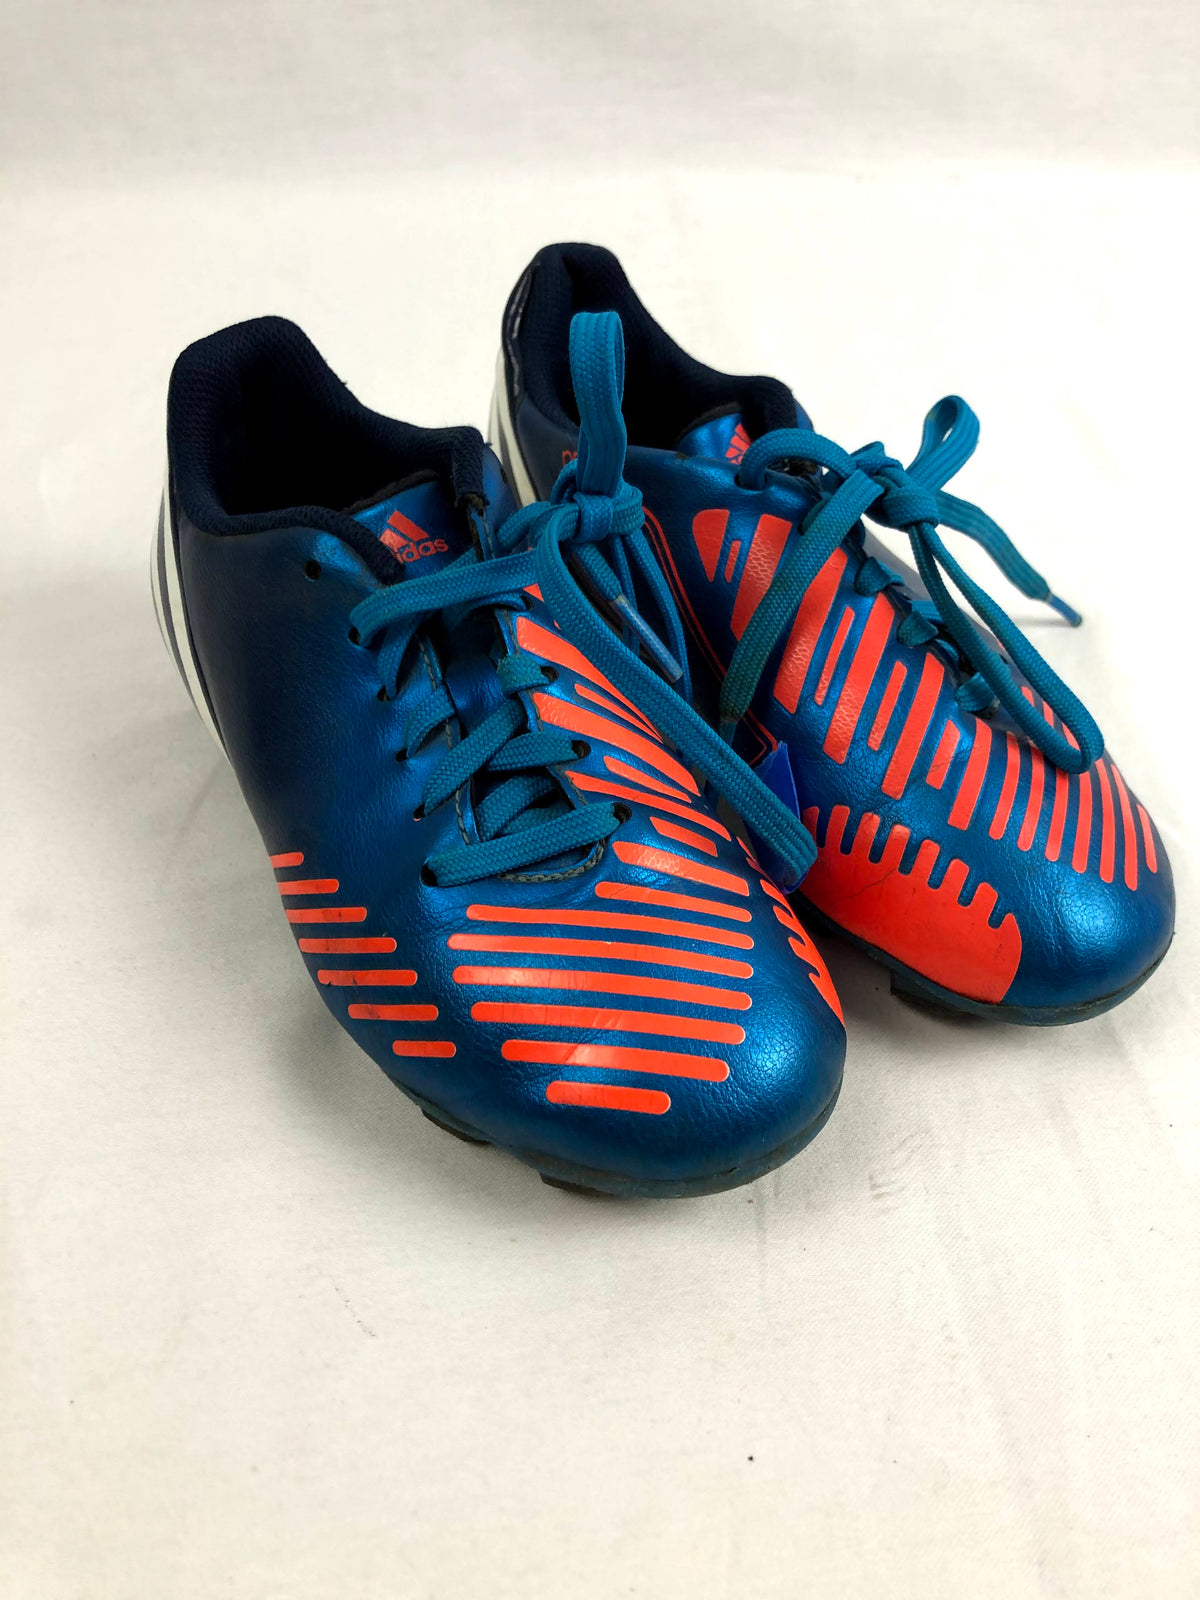 soccer cleats size 12.5